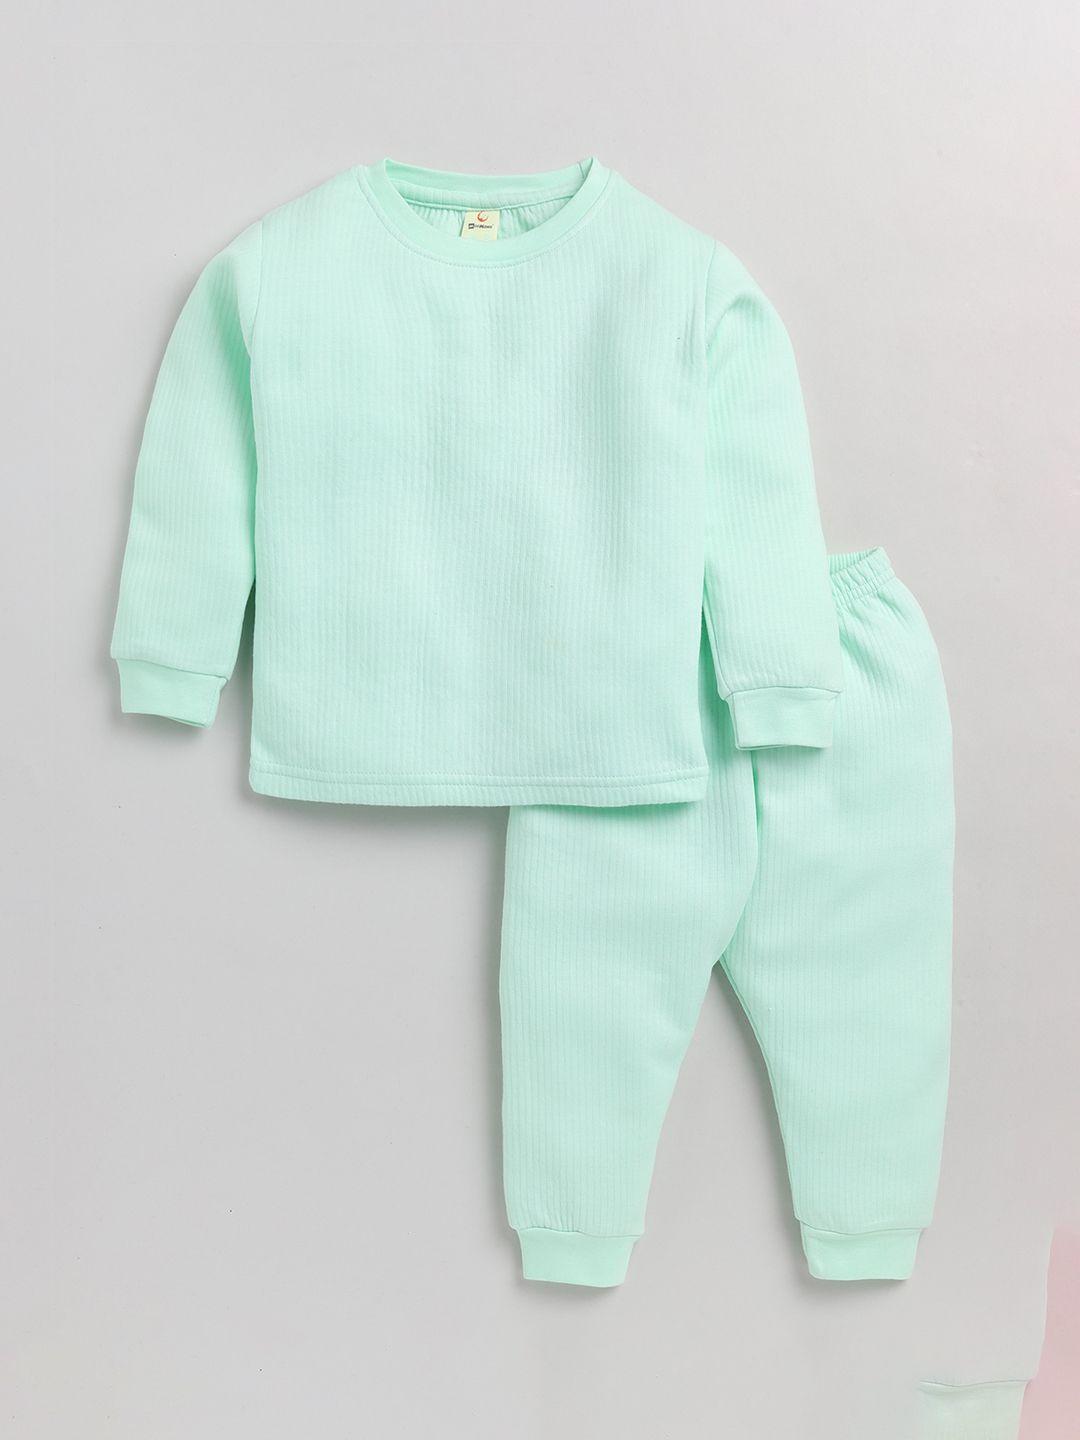 moonkids infant boys green cotton thermal set